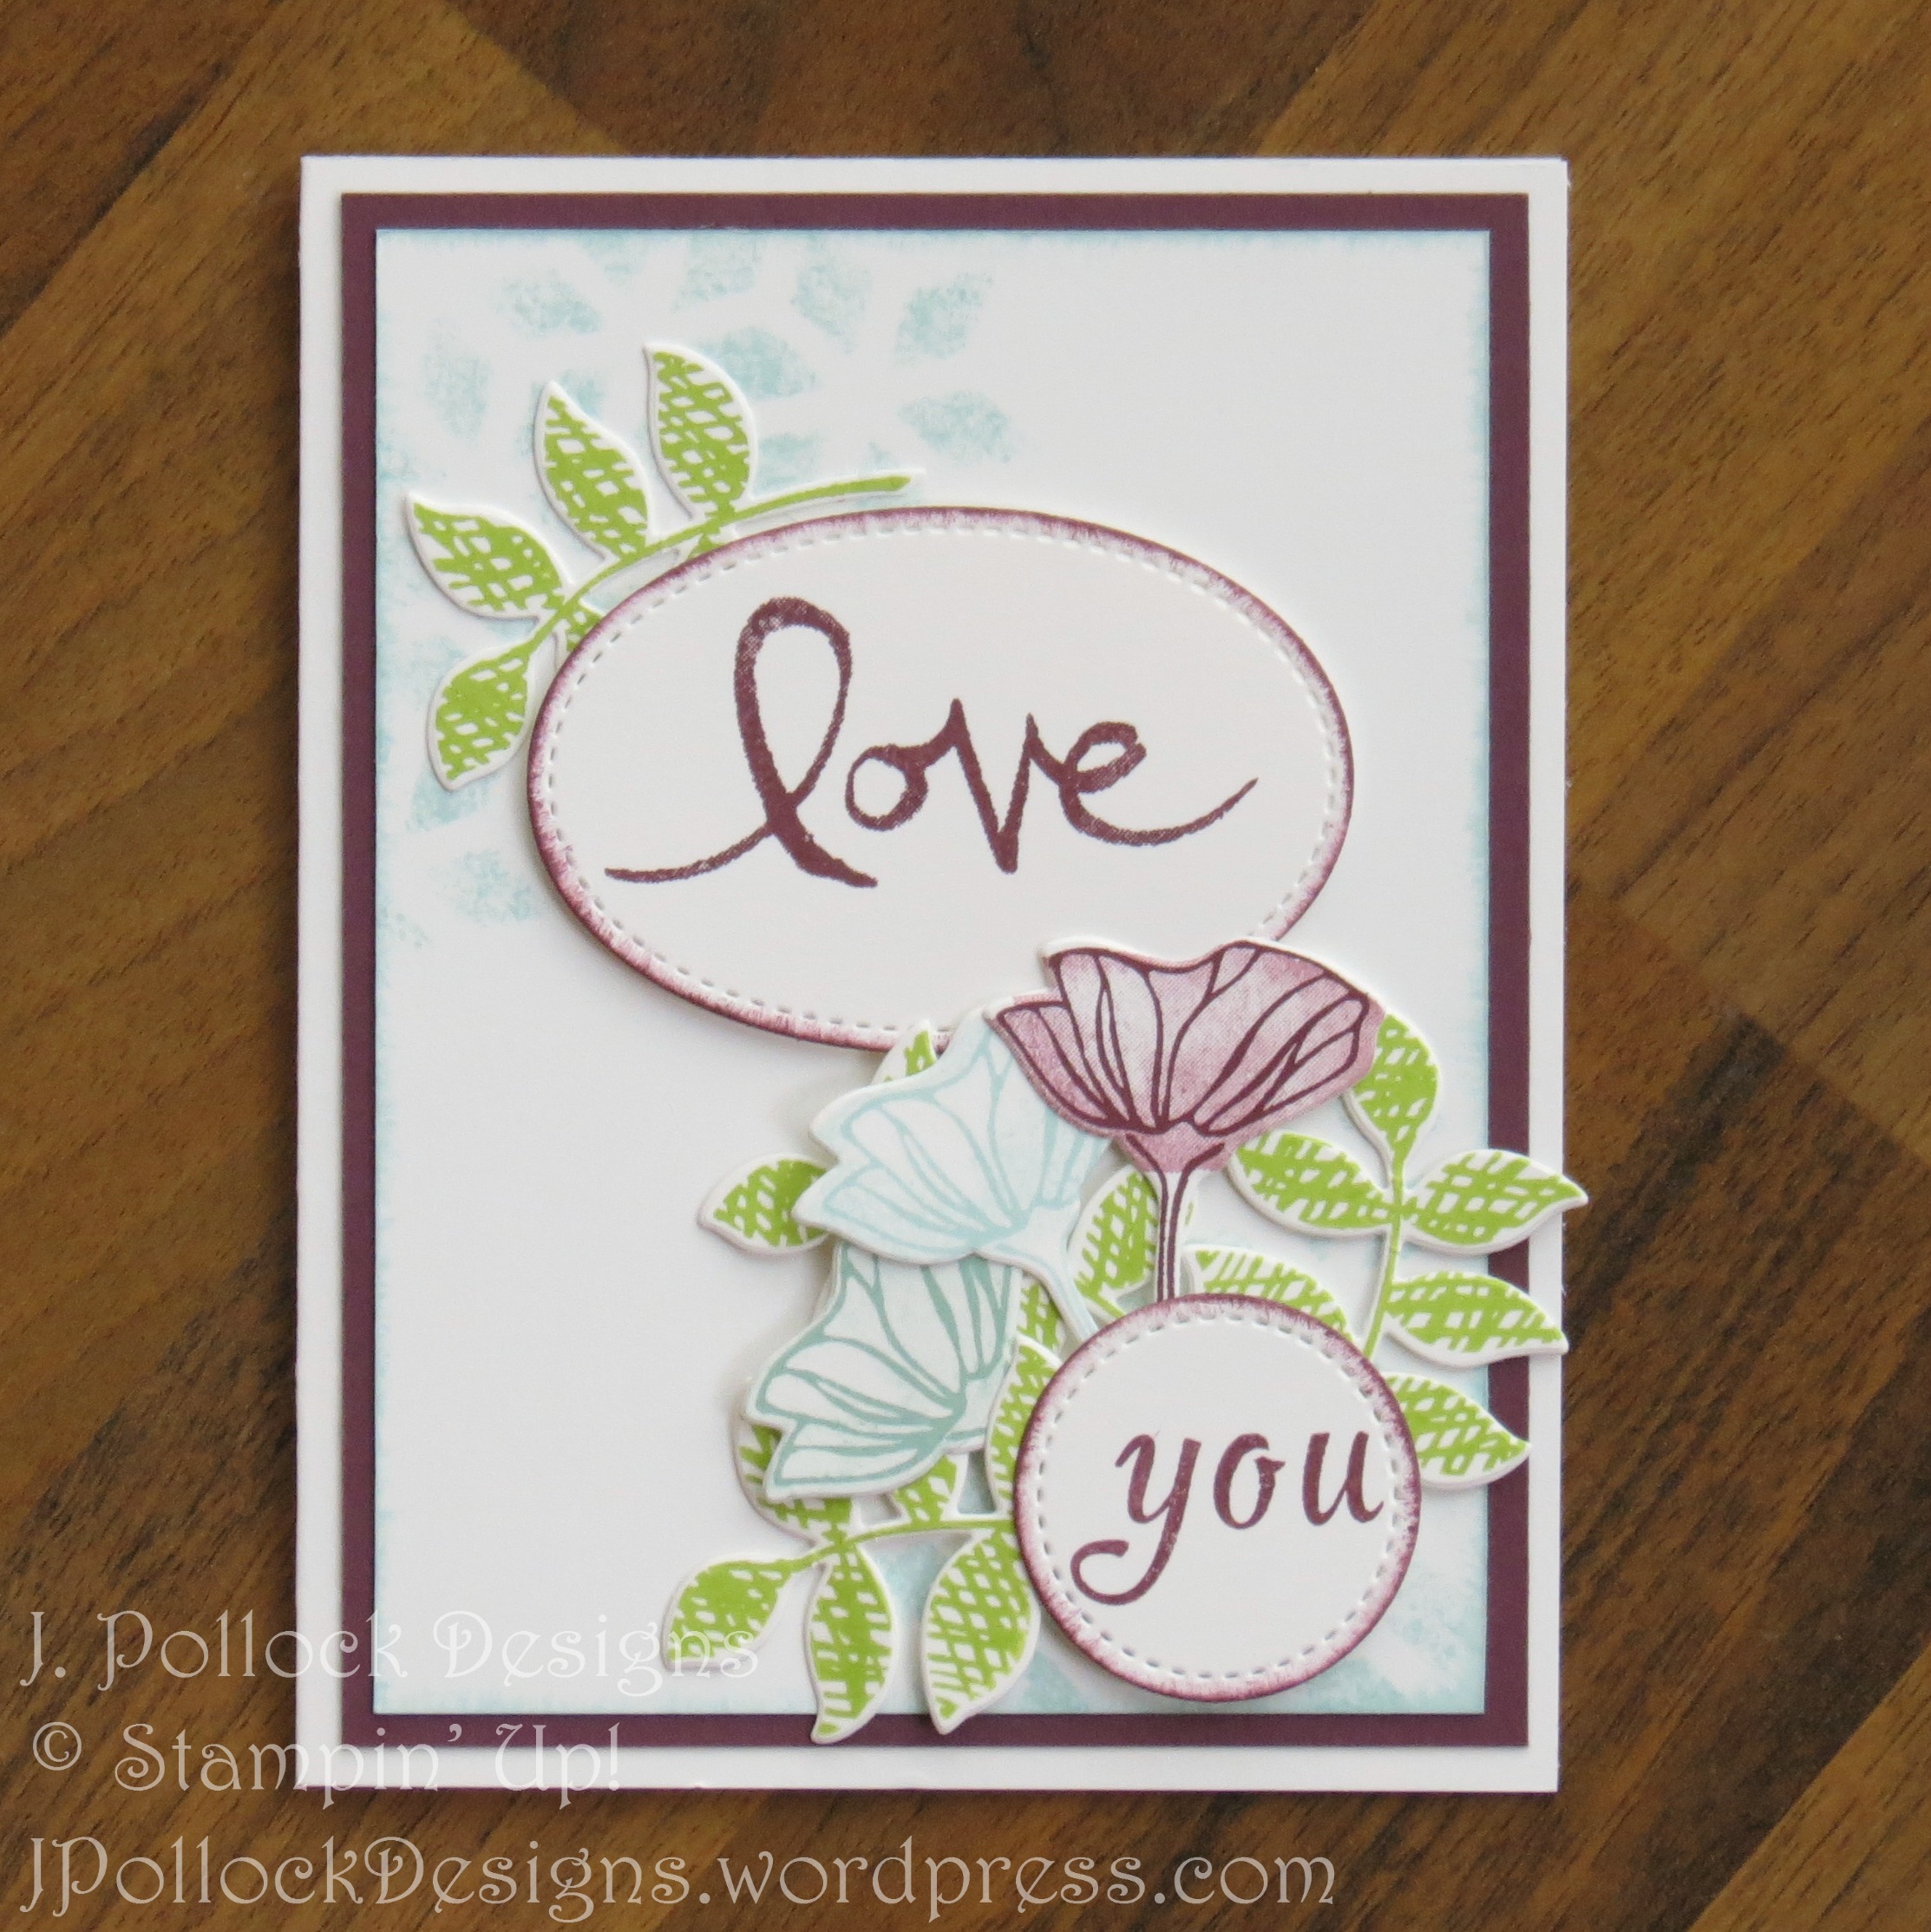 J. Pollock Designs - Stampin' Up! - Oh So Eclectic, Watercolor Words, Brushwork Alphabet